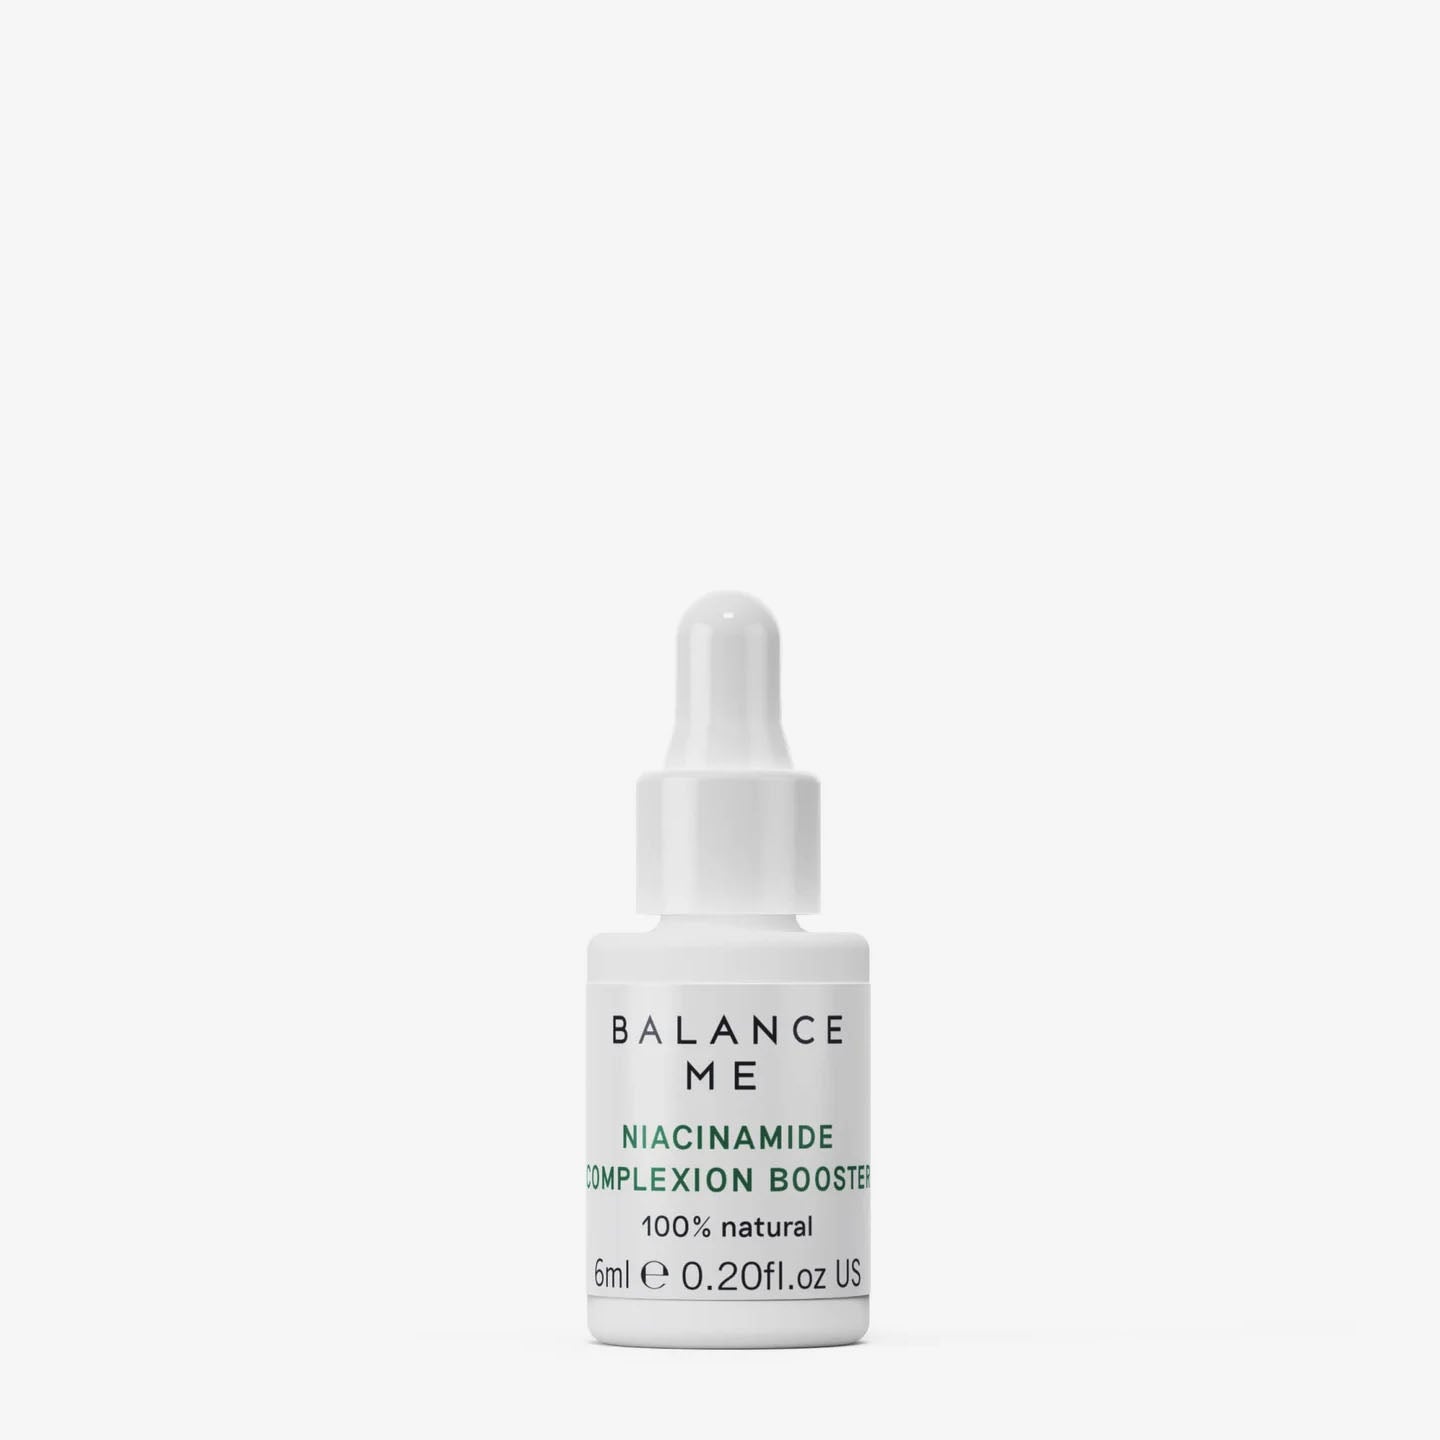 Niacinamide Complexion Booster 6ml